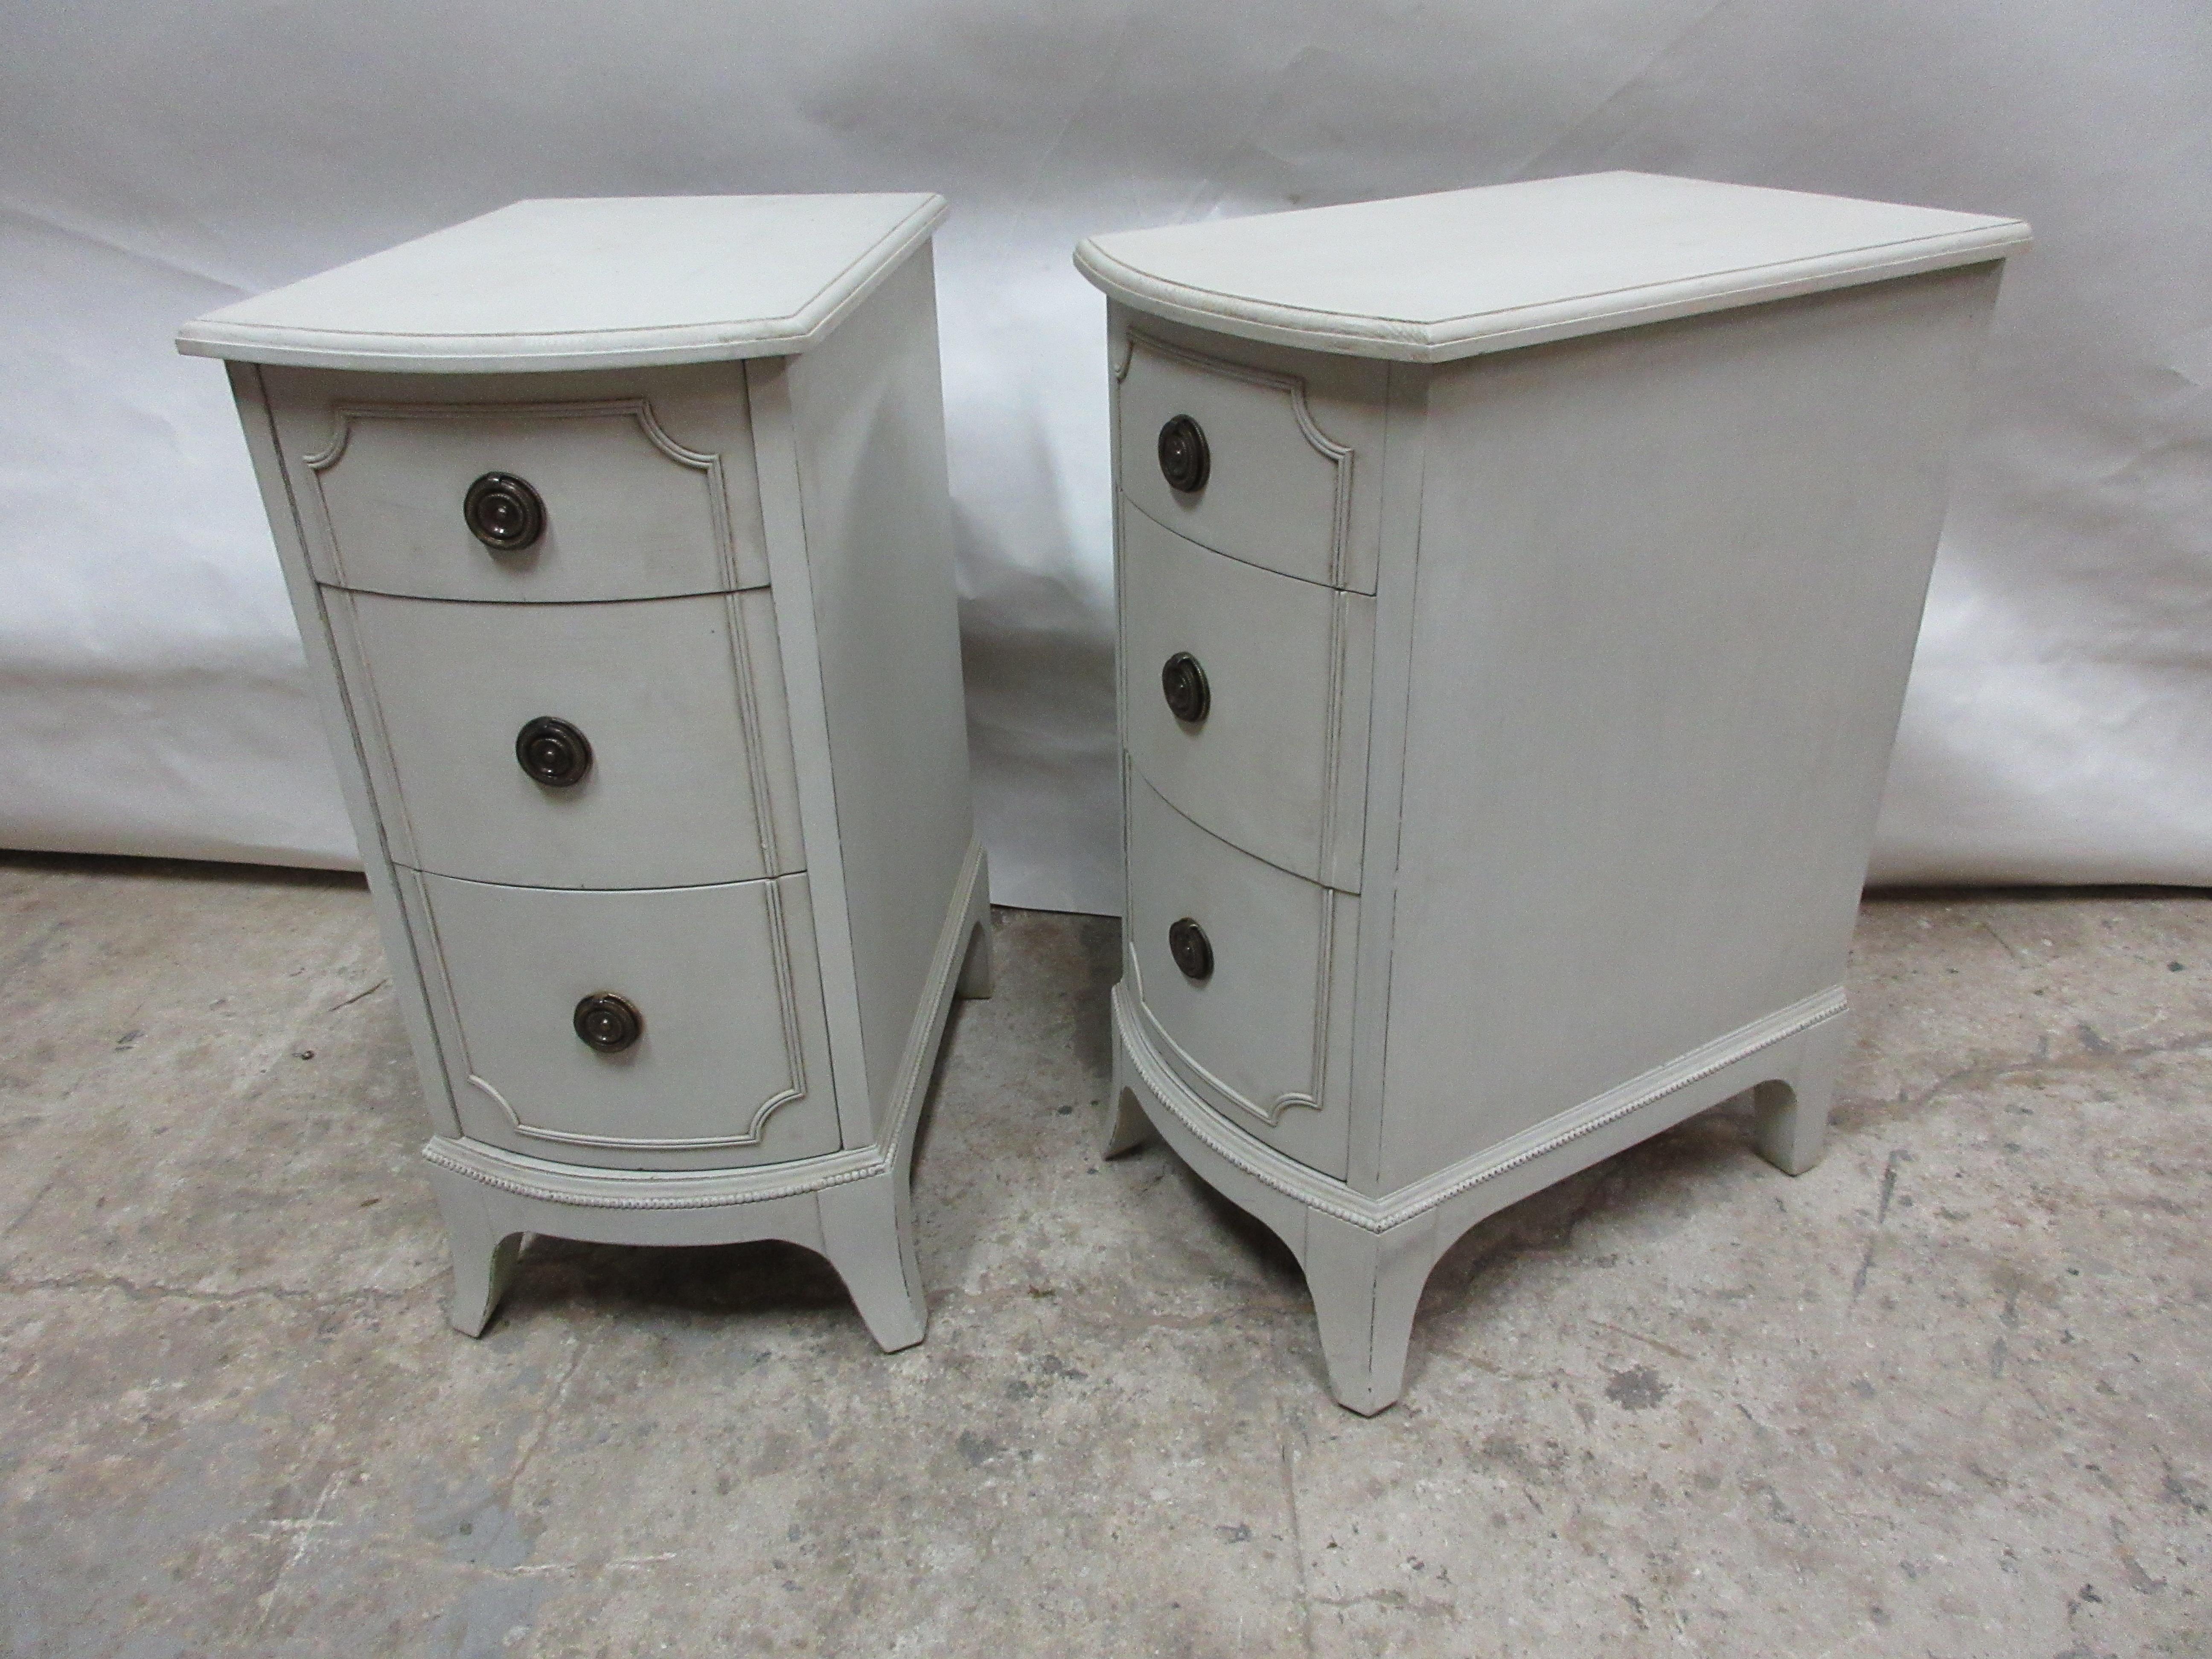 Country 3-Drawer Nightstands